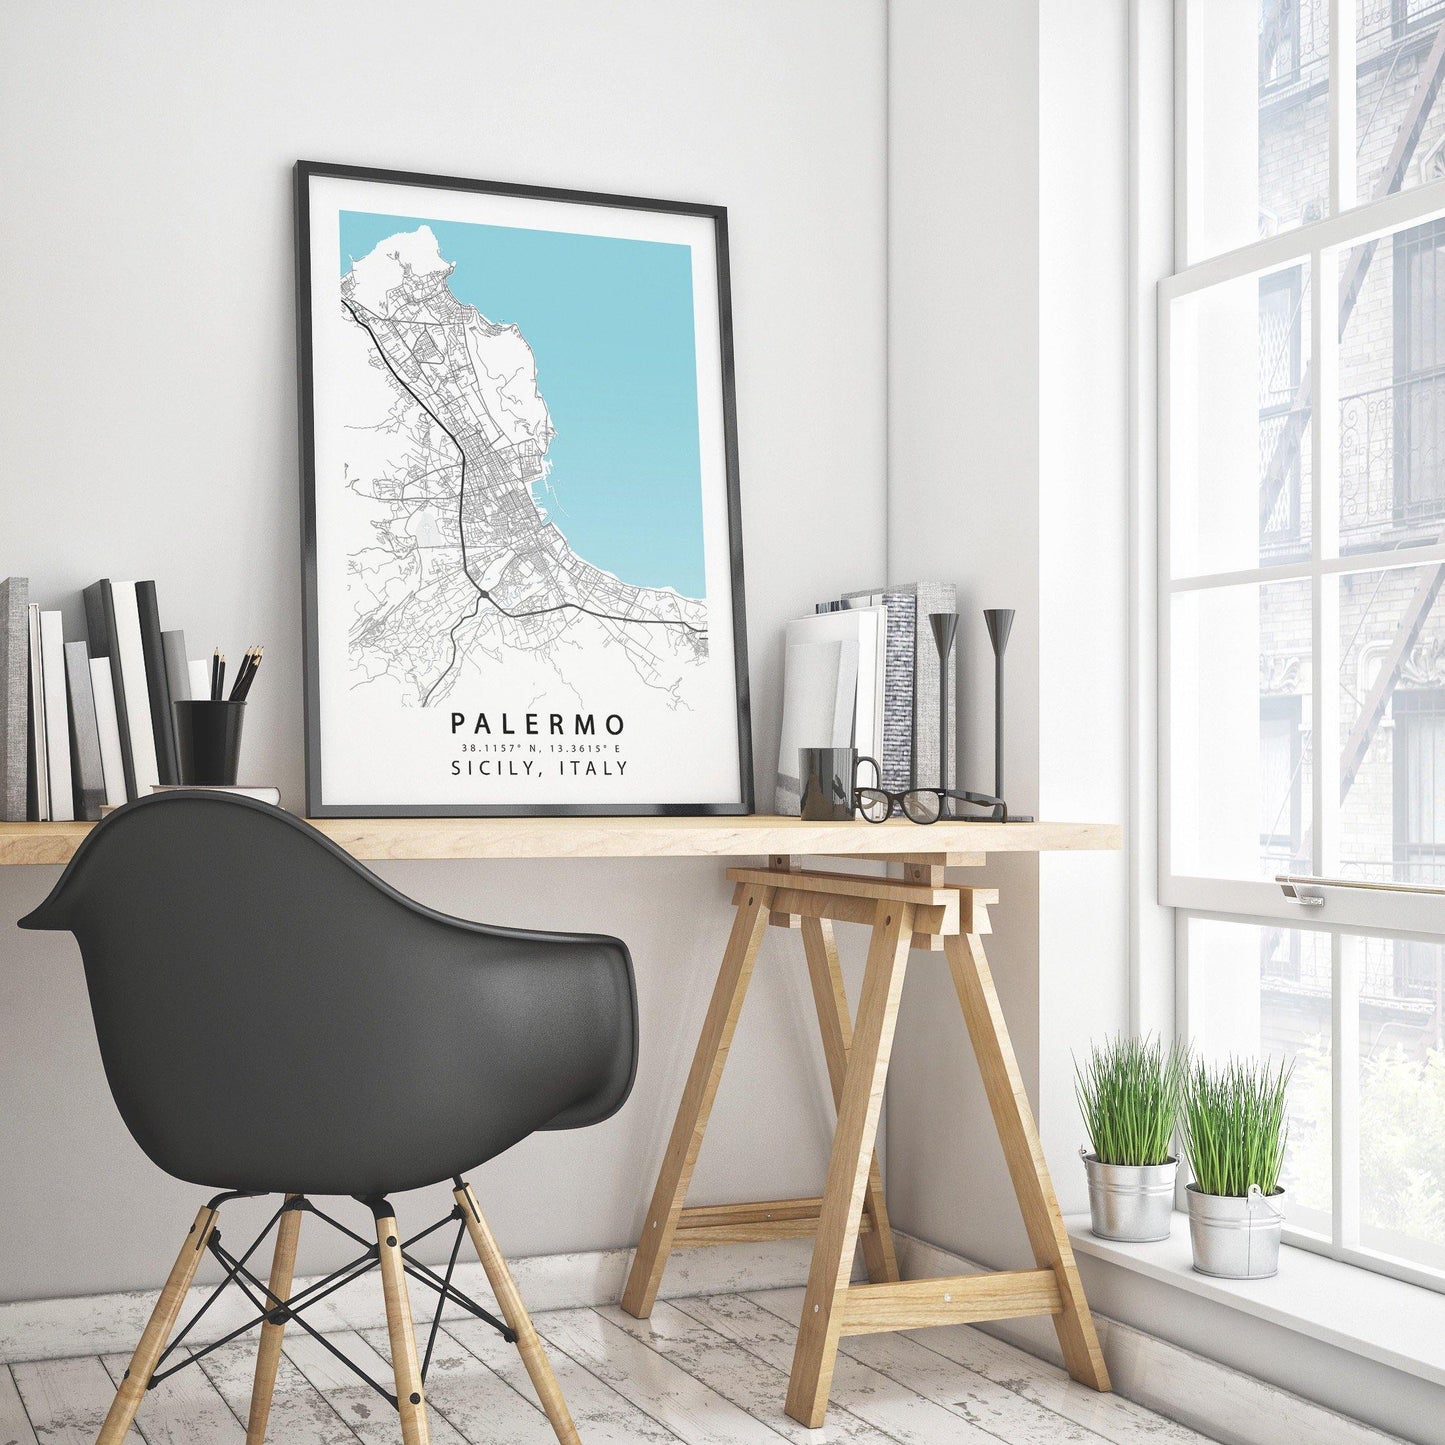 PALERMO Italy Map Print | Italia Map Art Poster | Palermo Sicily | City Street Road Map Print | Variety Sizes - 98types